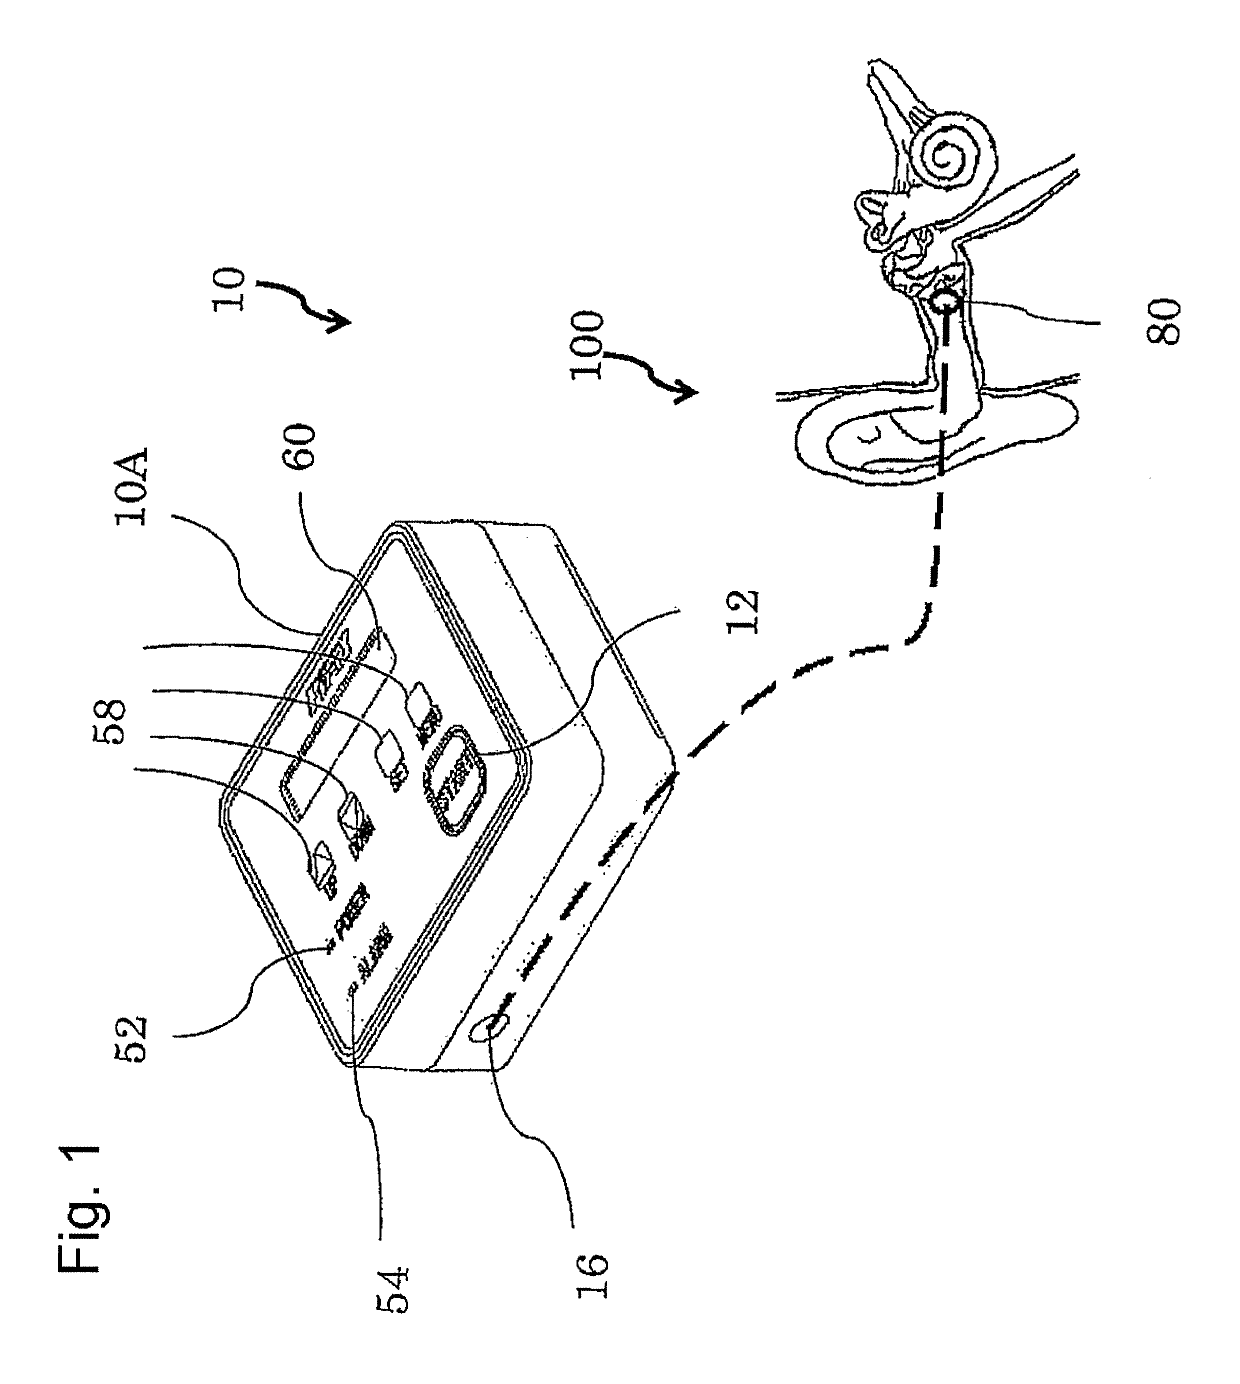 Portable device for treating Meniere's disease and similar conditions